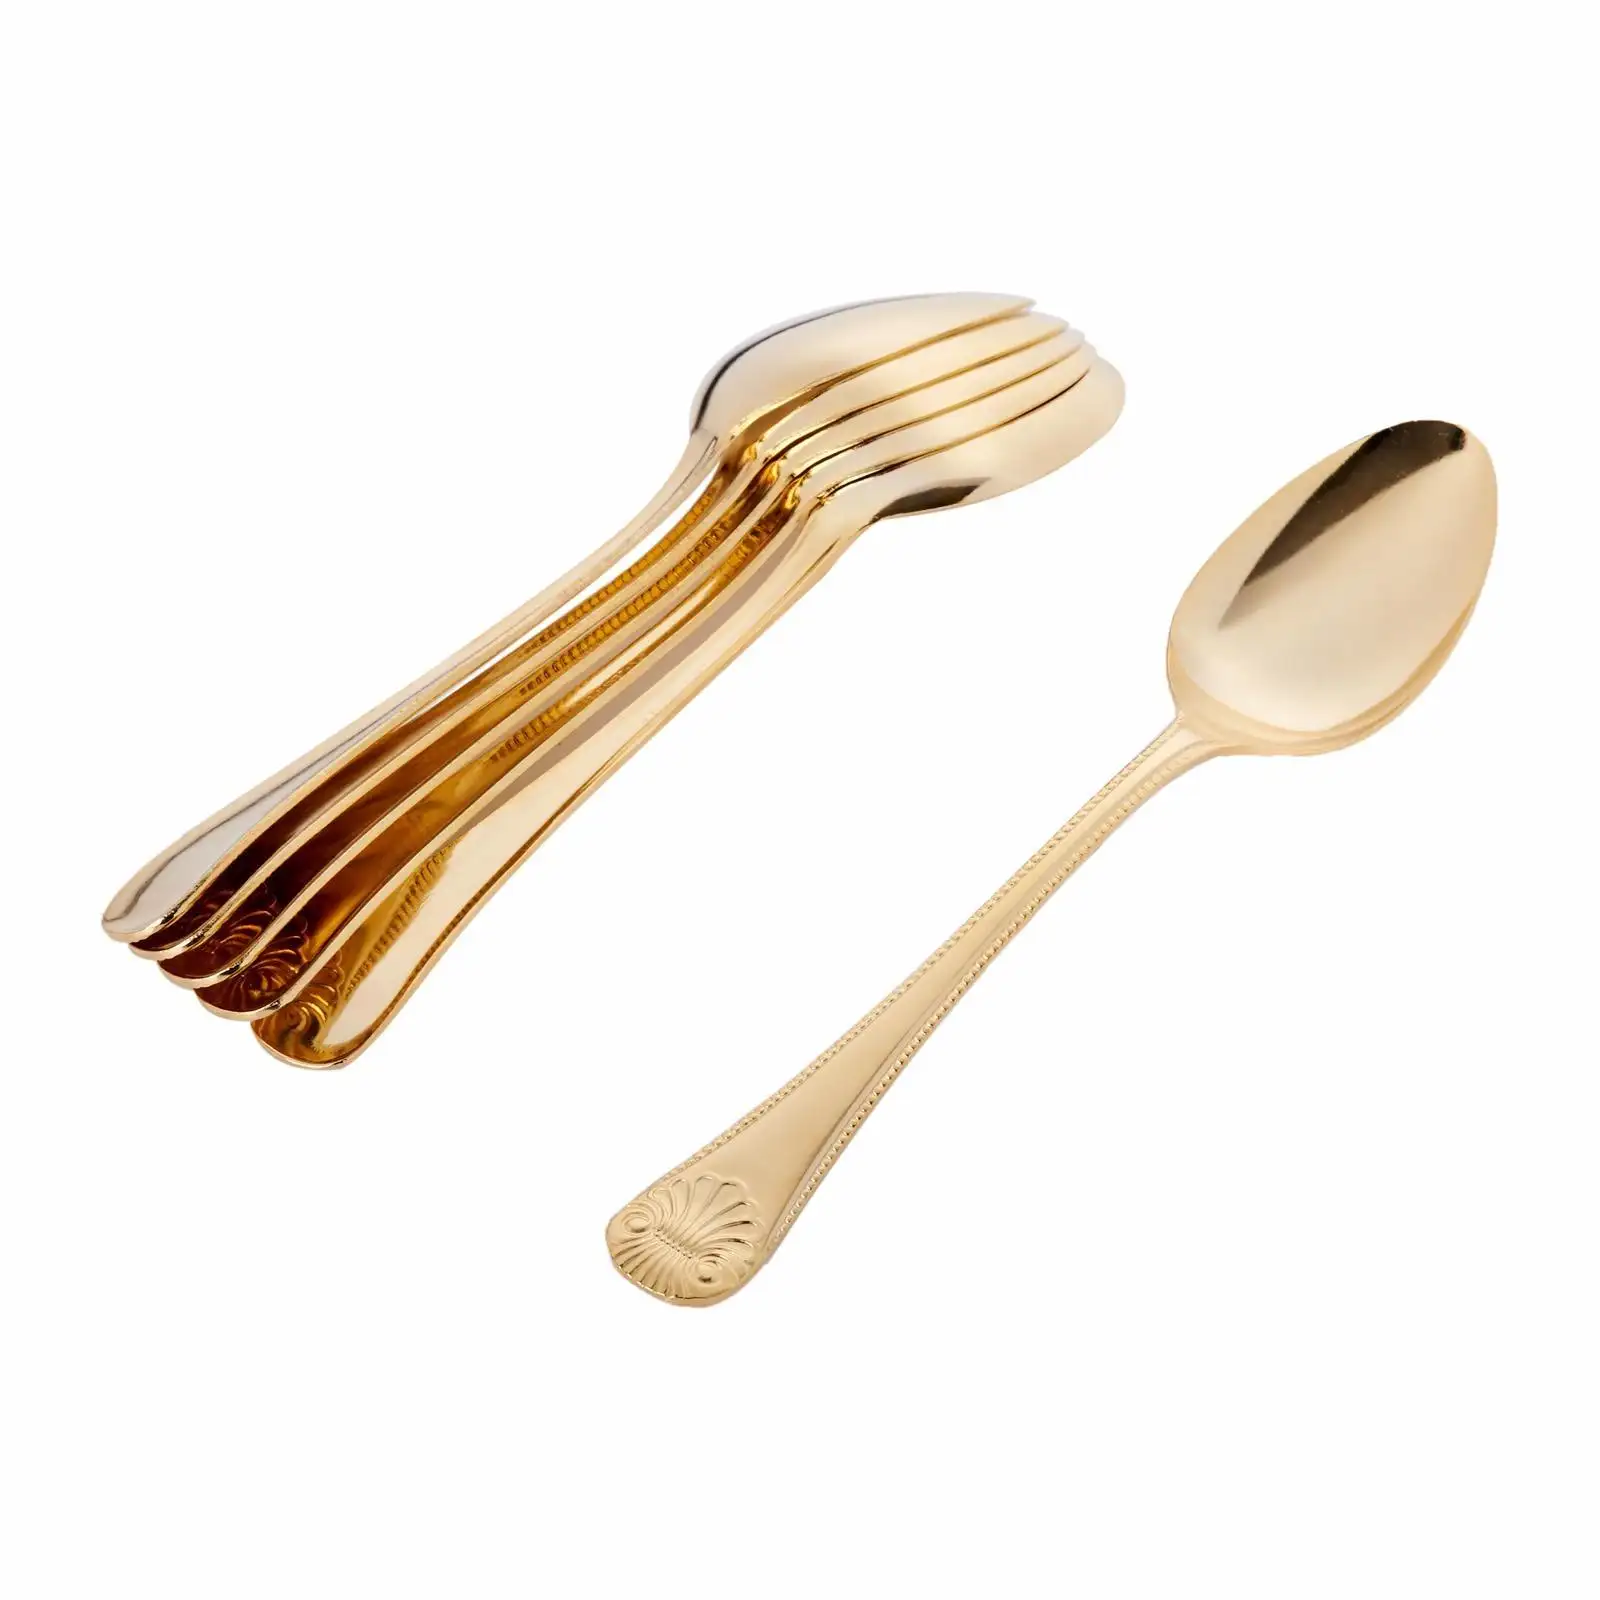 Restaurant usage trendy best flatware Gold Plated Stainless Steel Shell Dessert Spoon L18.8 W4Cm (6Pc) Nihon Cutlery from Japan